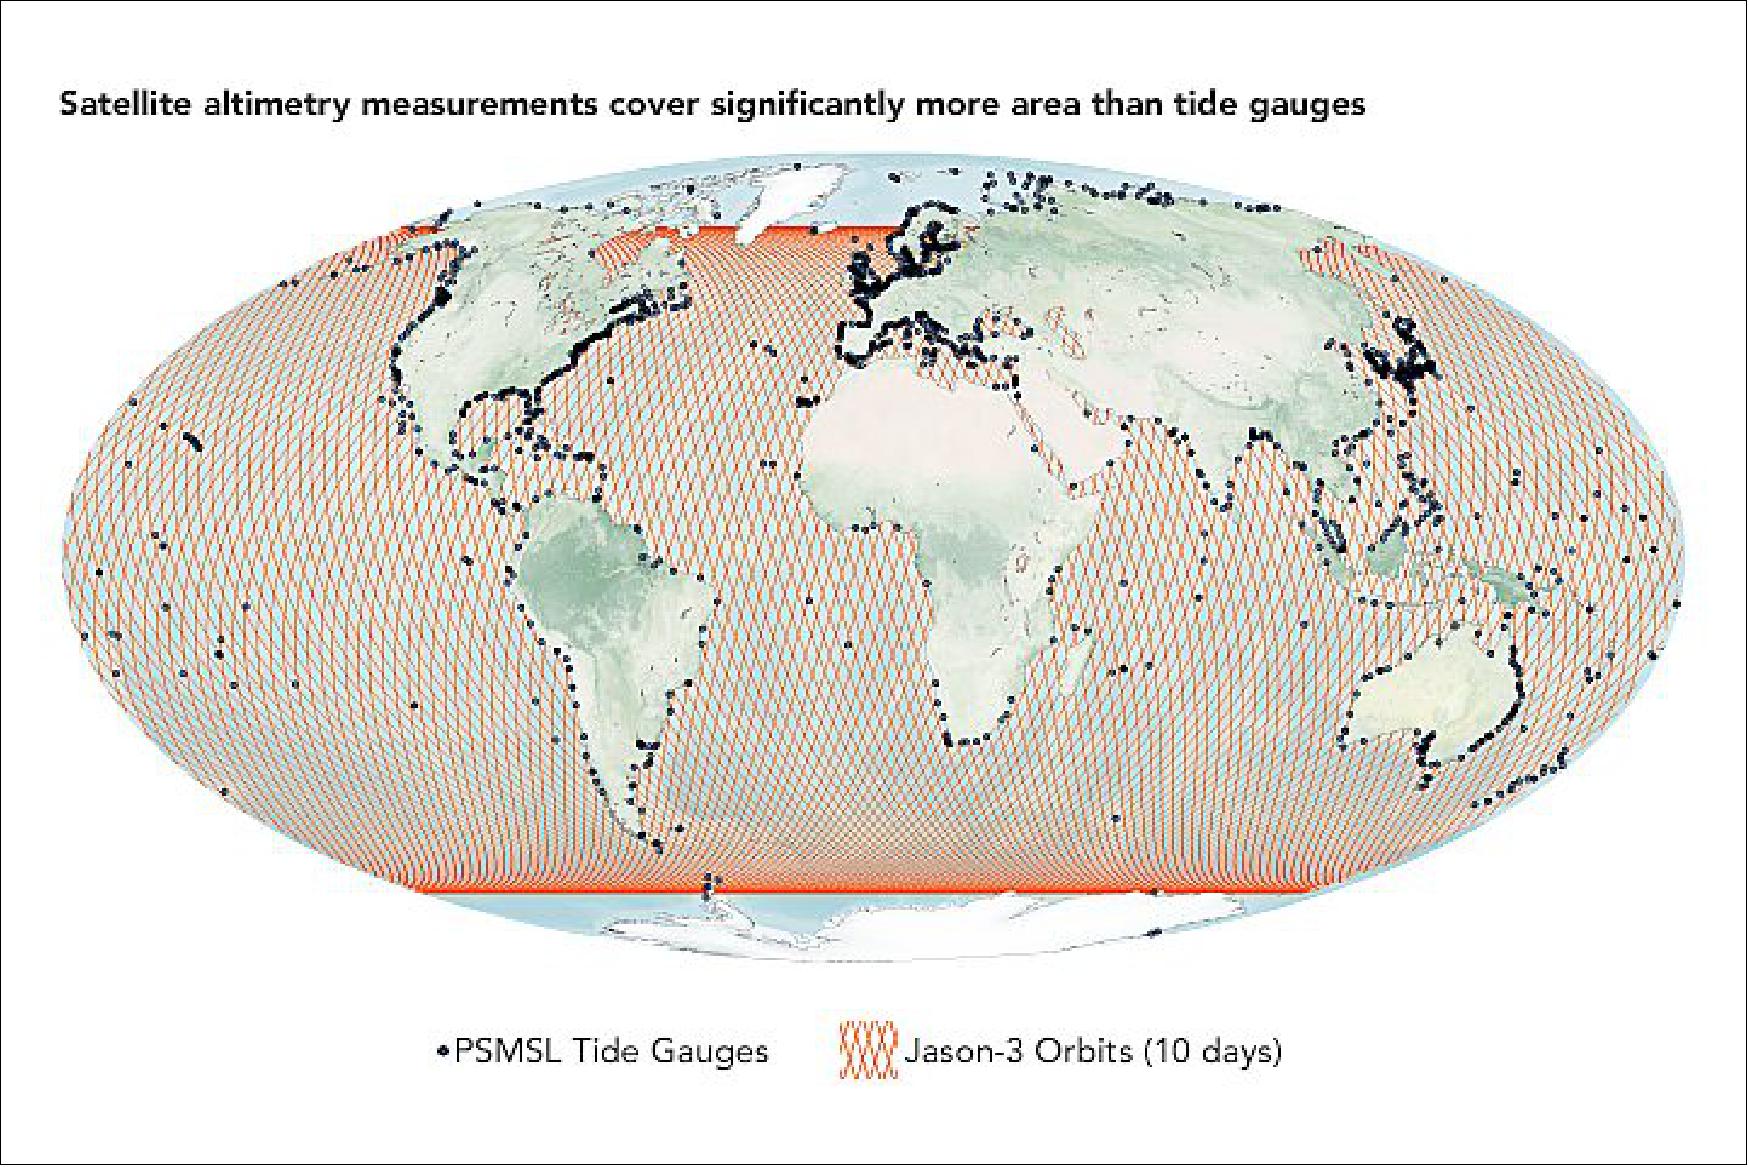 Figure 5: Overview of PSMSL (Permanent Service for Mean Sea Level) tide gauge locations in 2020 (image credit: NASA Earth Observatory images by Joshua Stevens,using tide gauge data from PSMSL. Story by Michael Carlowicz, with science interpretation by Ben Hamlington/NASA JPL, Richard Ray/NASA Goddard, and Josh Willis, NASA/JPL)